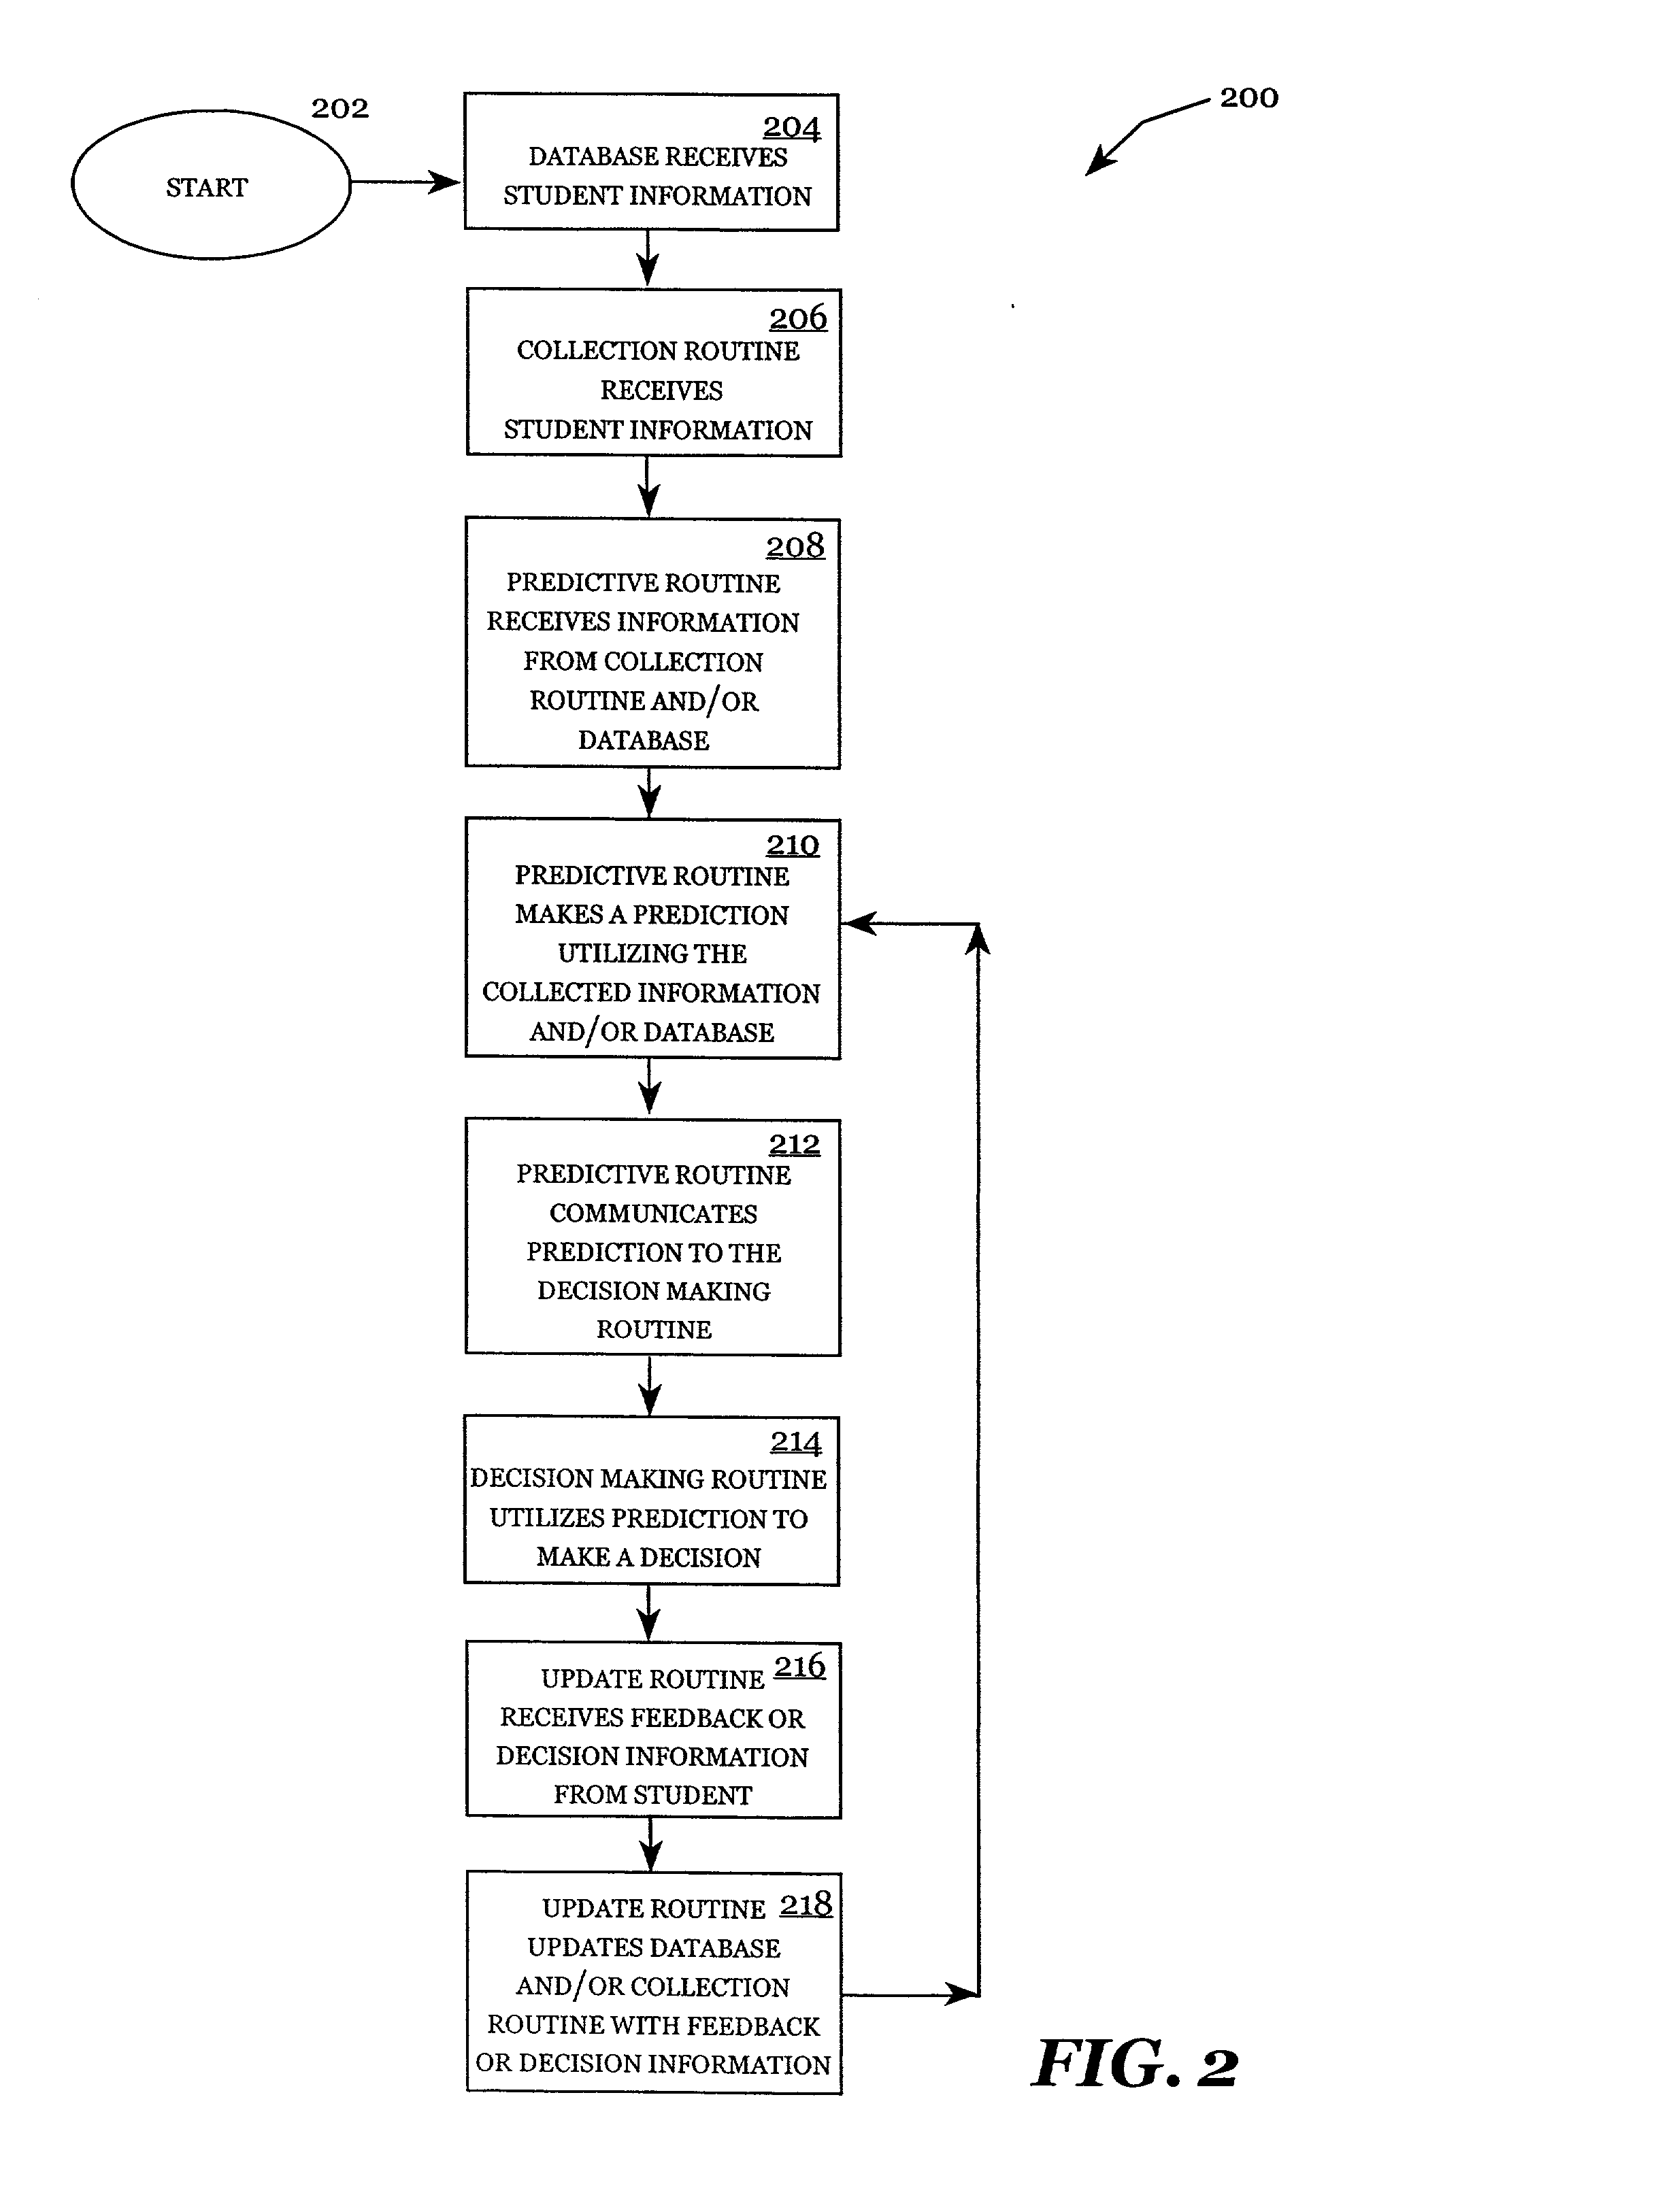 Systems and methods for making a prediction utilizing admissions-based information